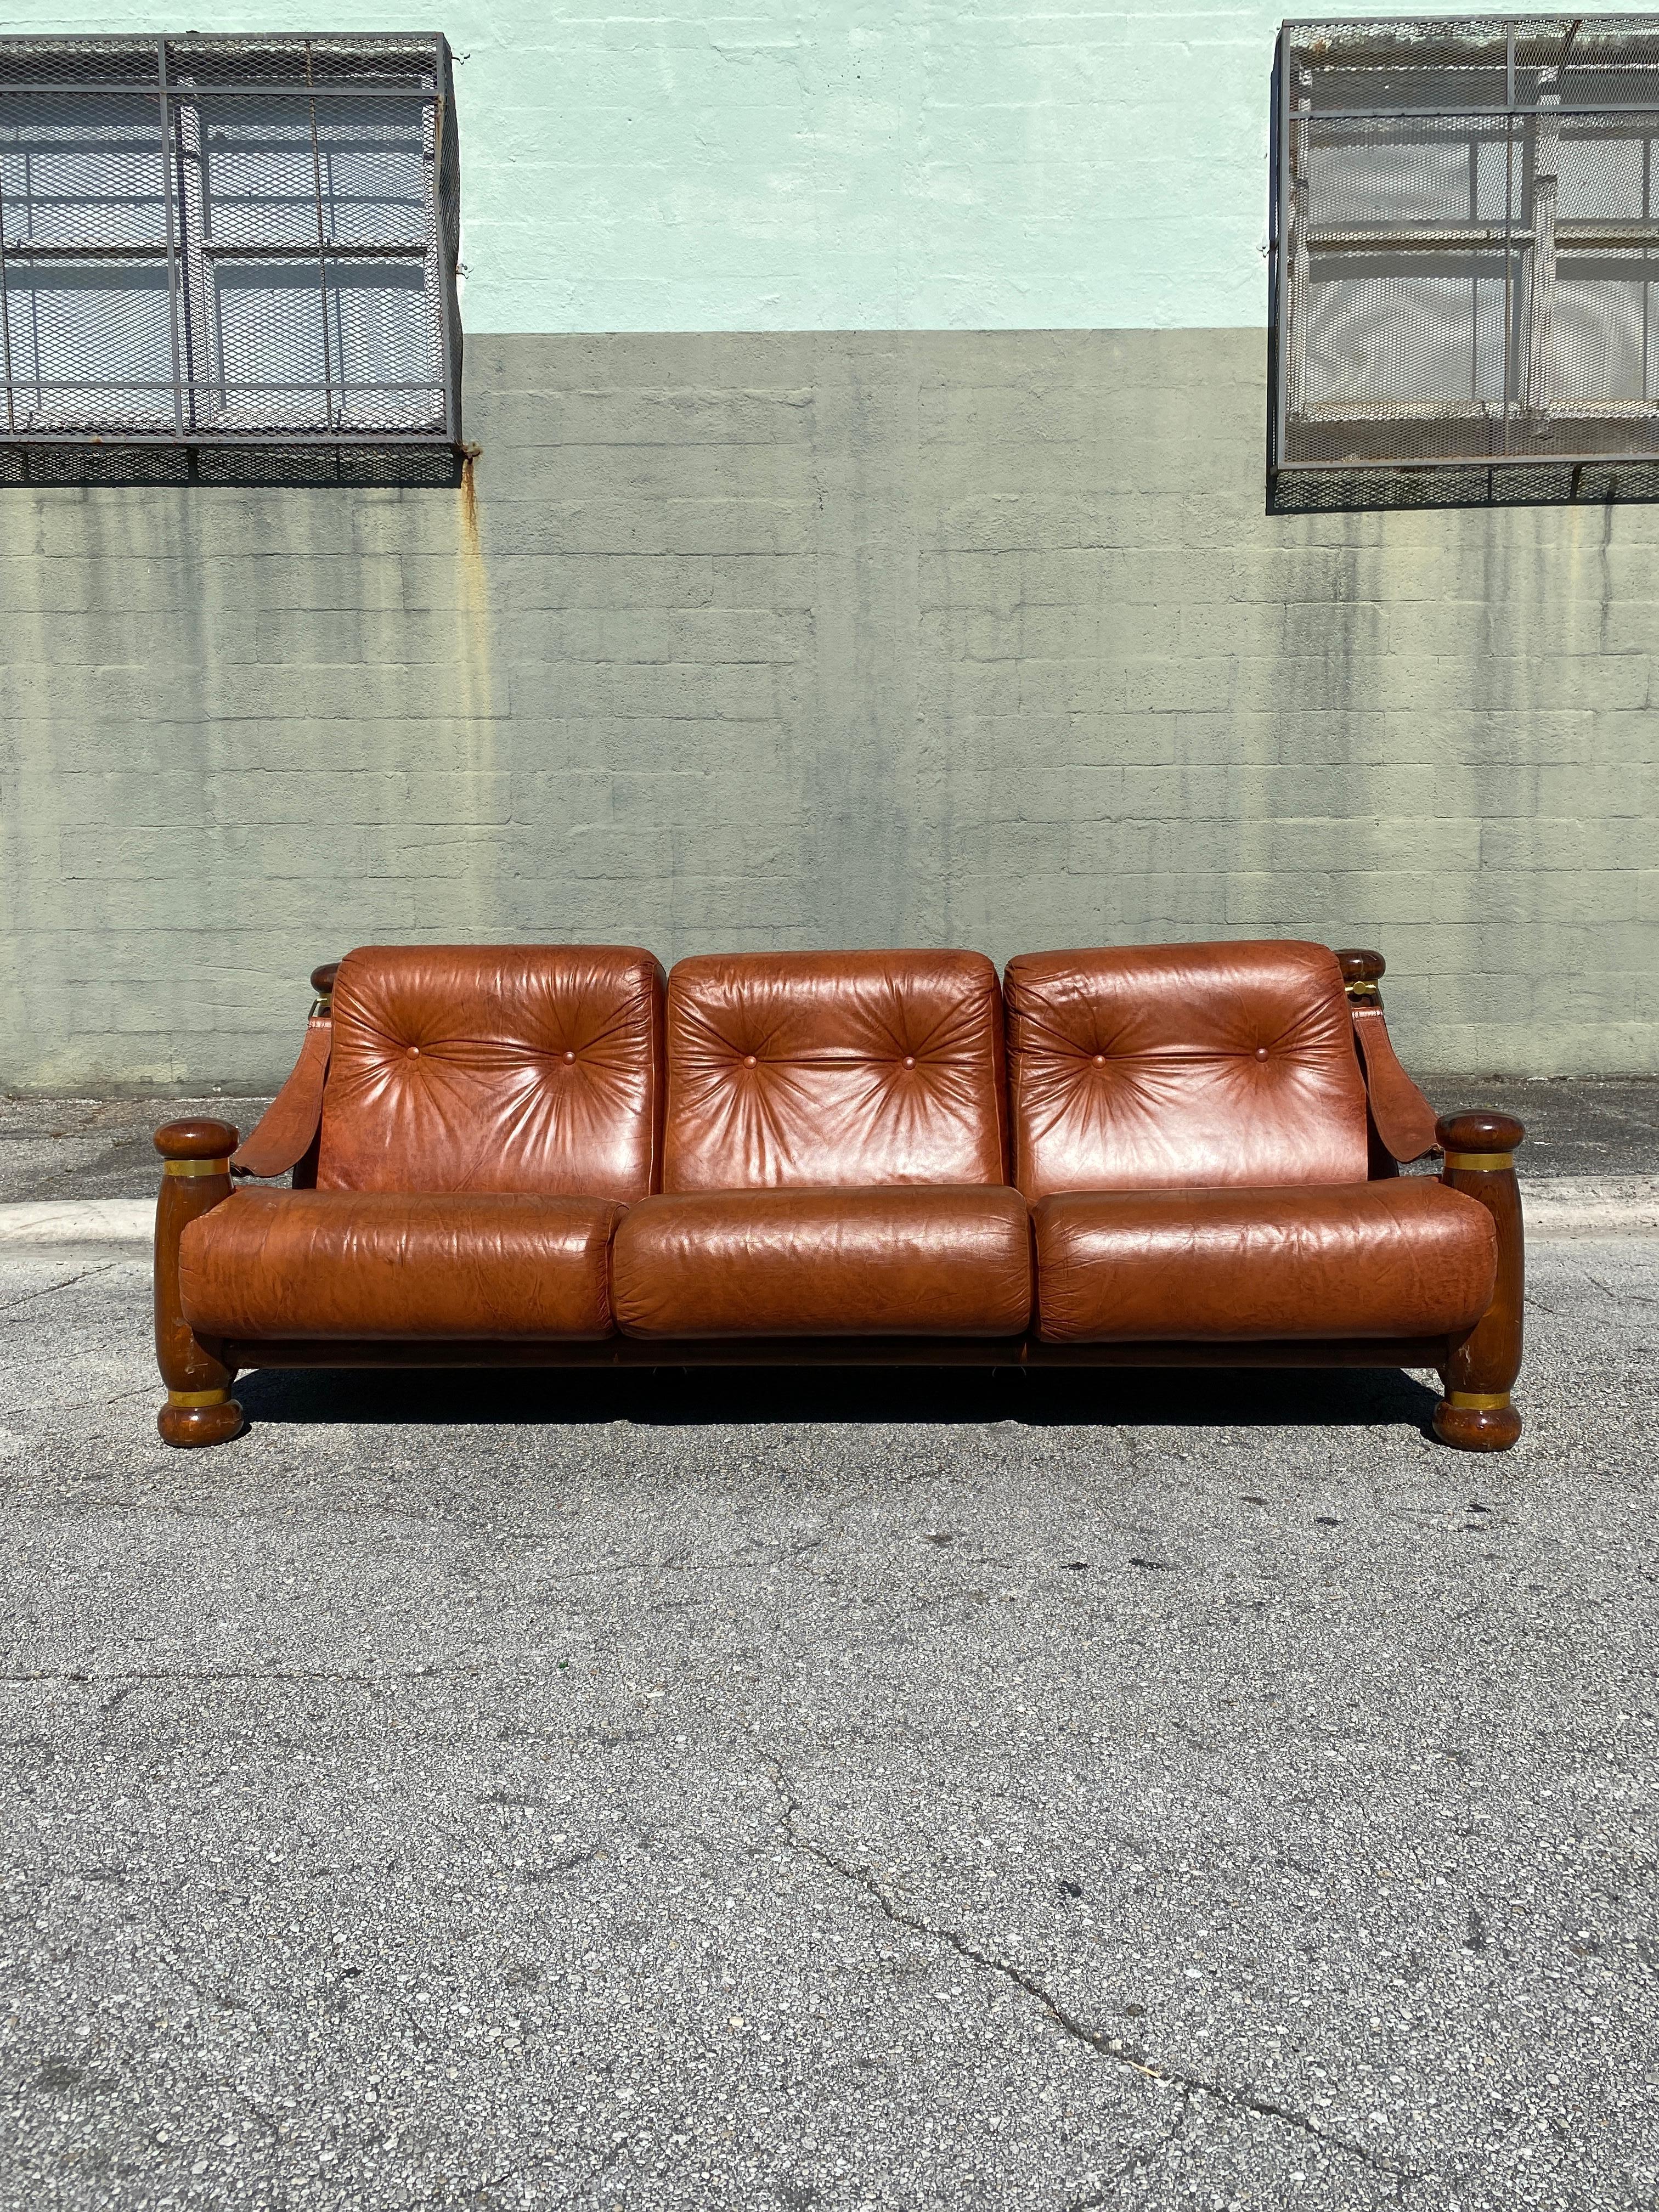 Vintage three seater sofa with pillar arm frames, leather swag armrests complement burnt orange leather cushions.

Circa 1960s.

Measures: 84”W x 37”D x 32”H x 14”SH